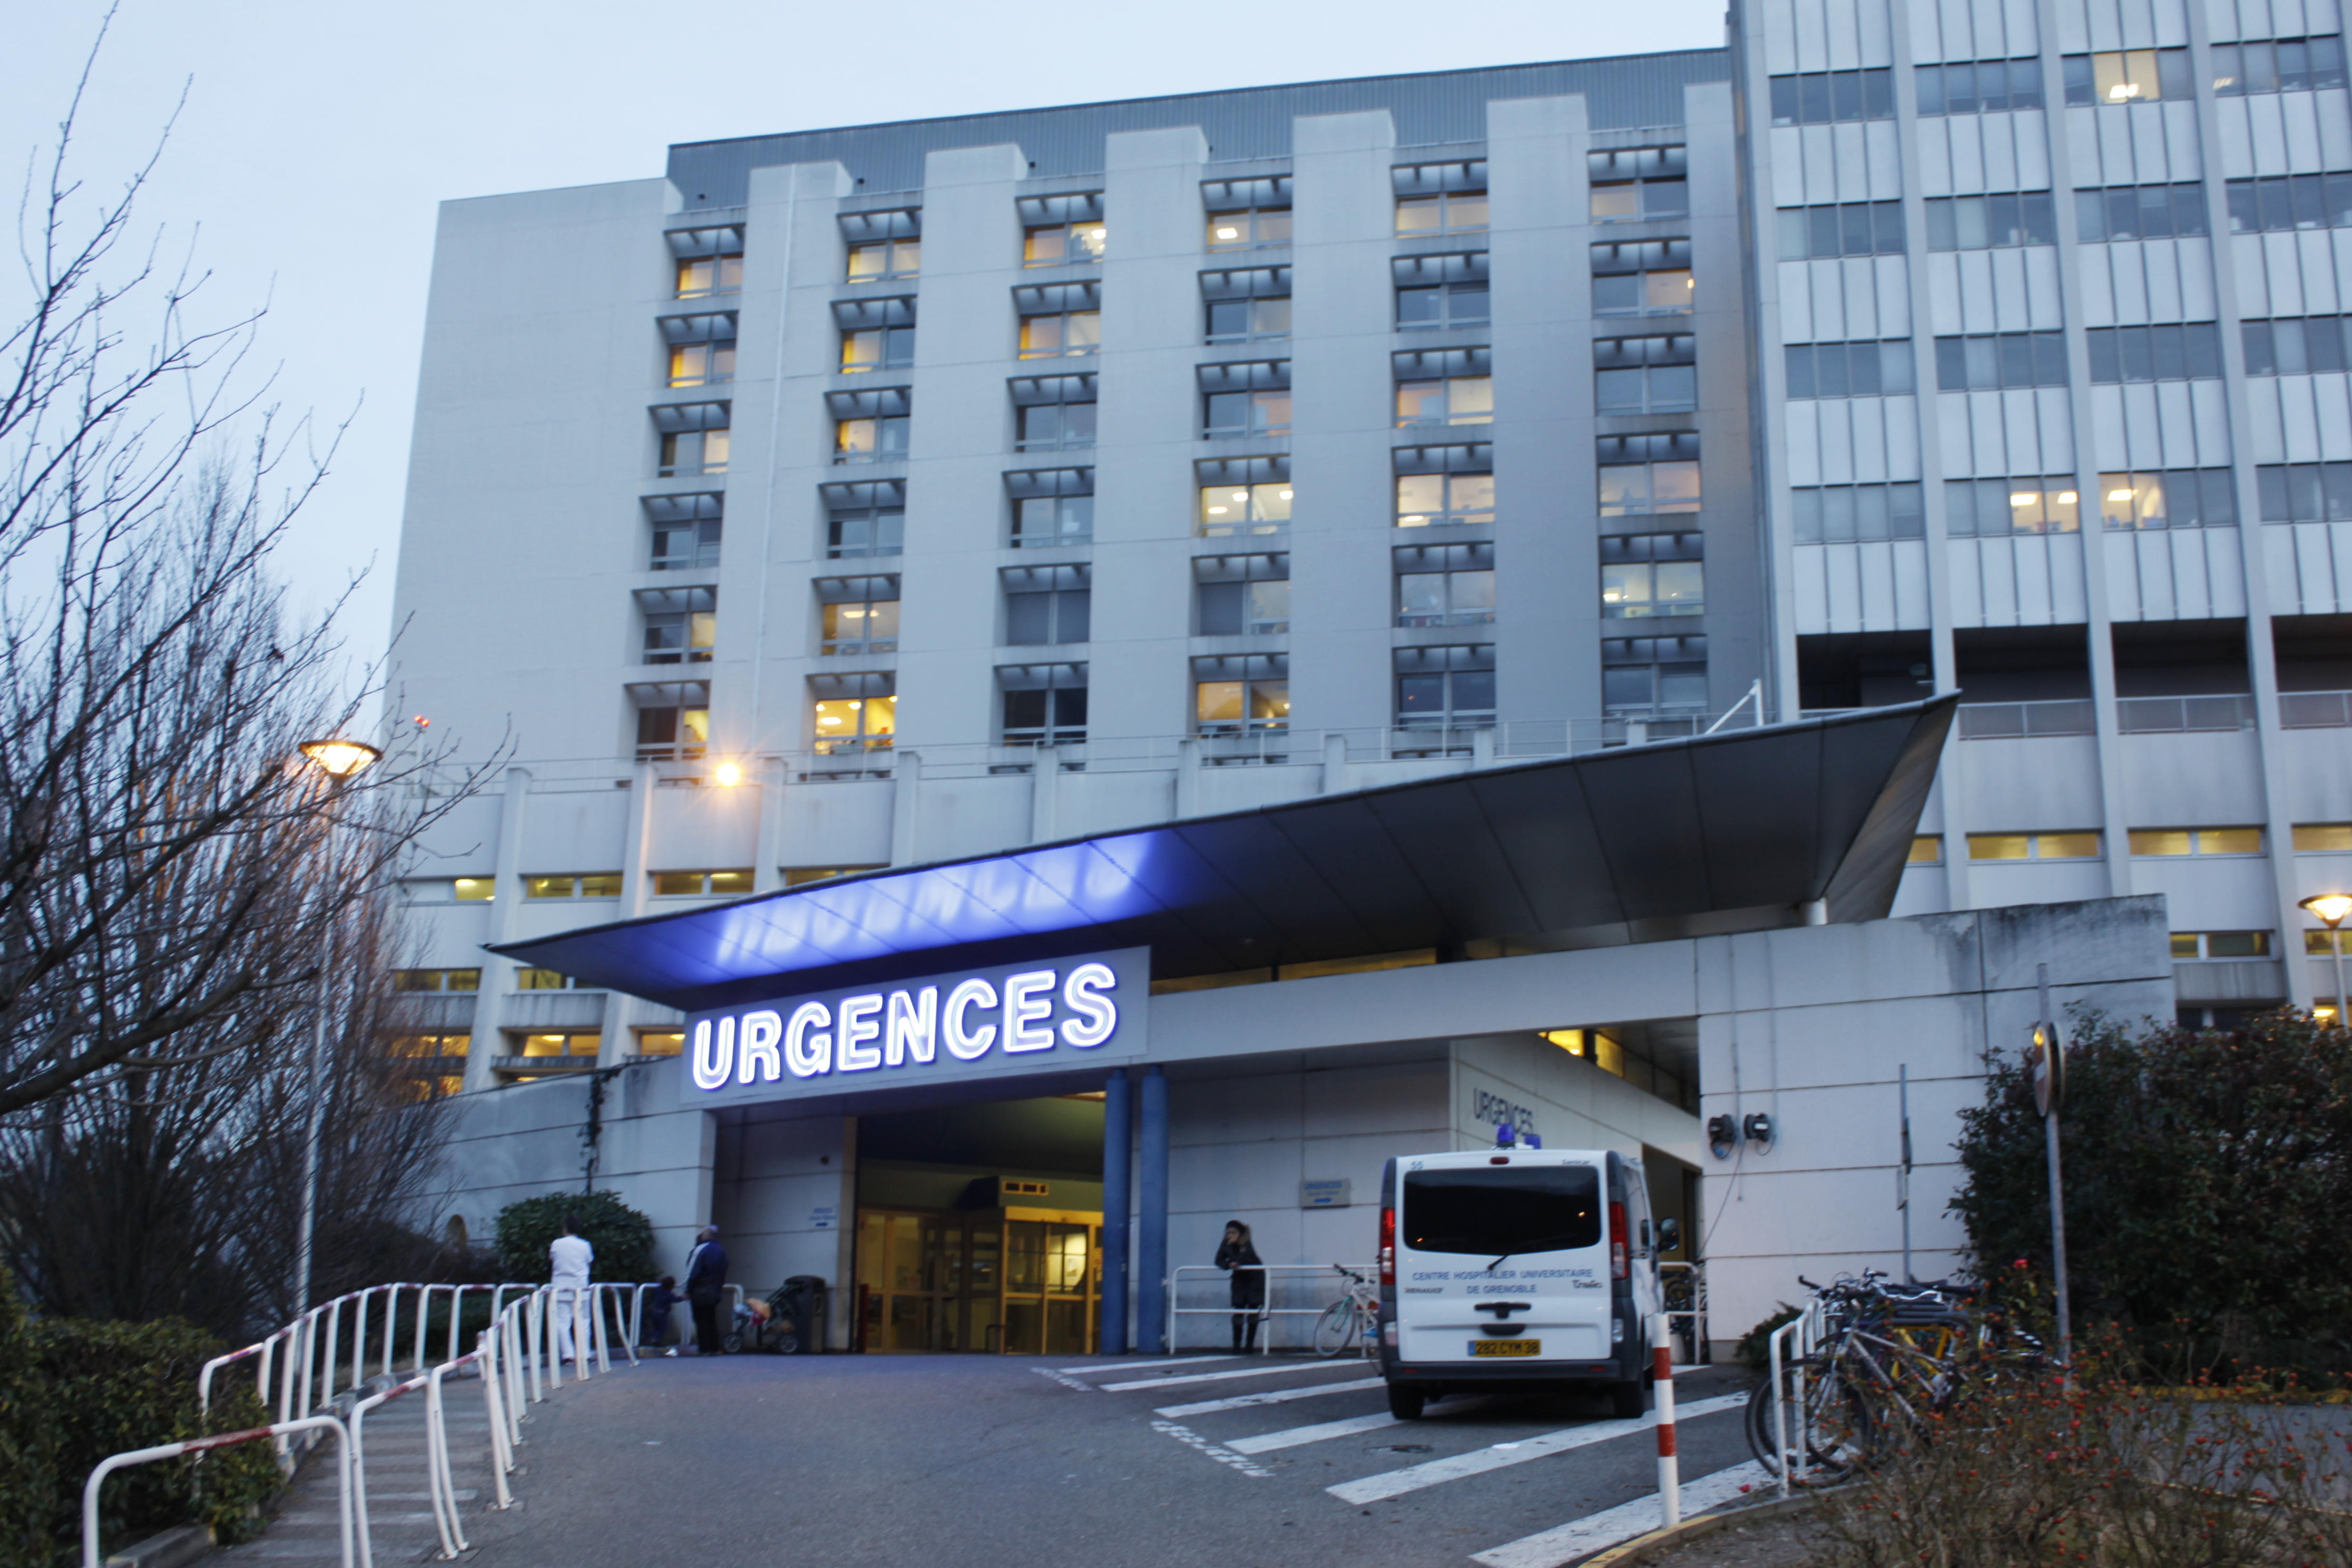 A hospital in Grenoble, France.